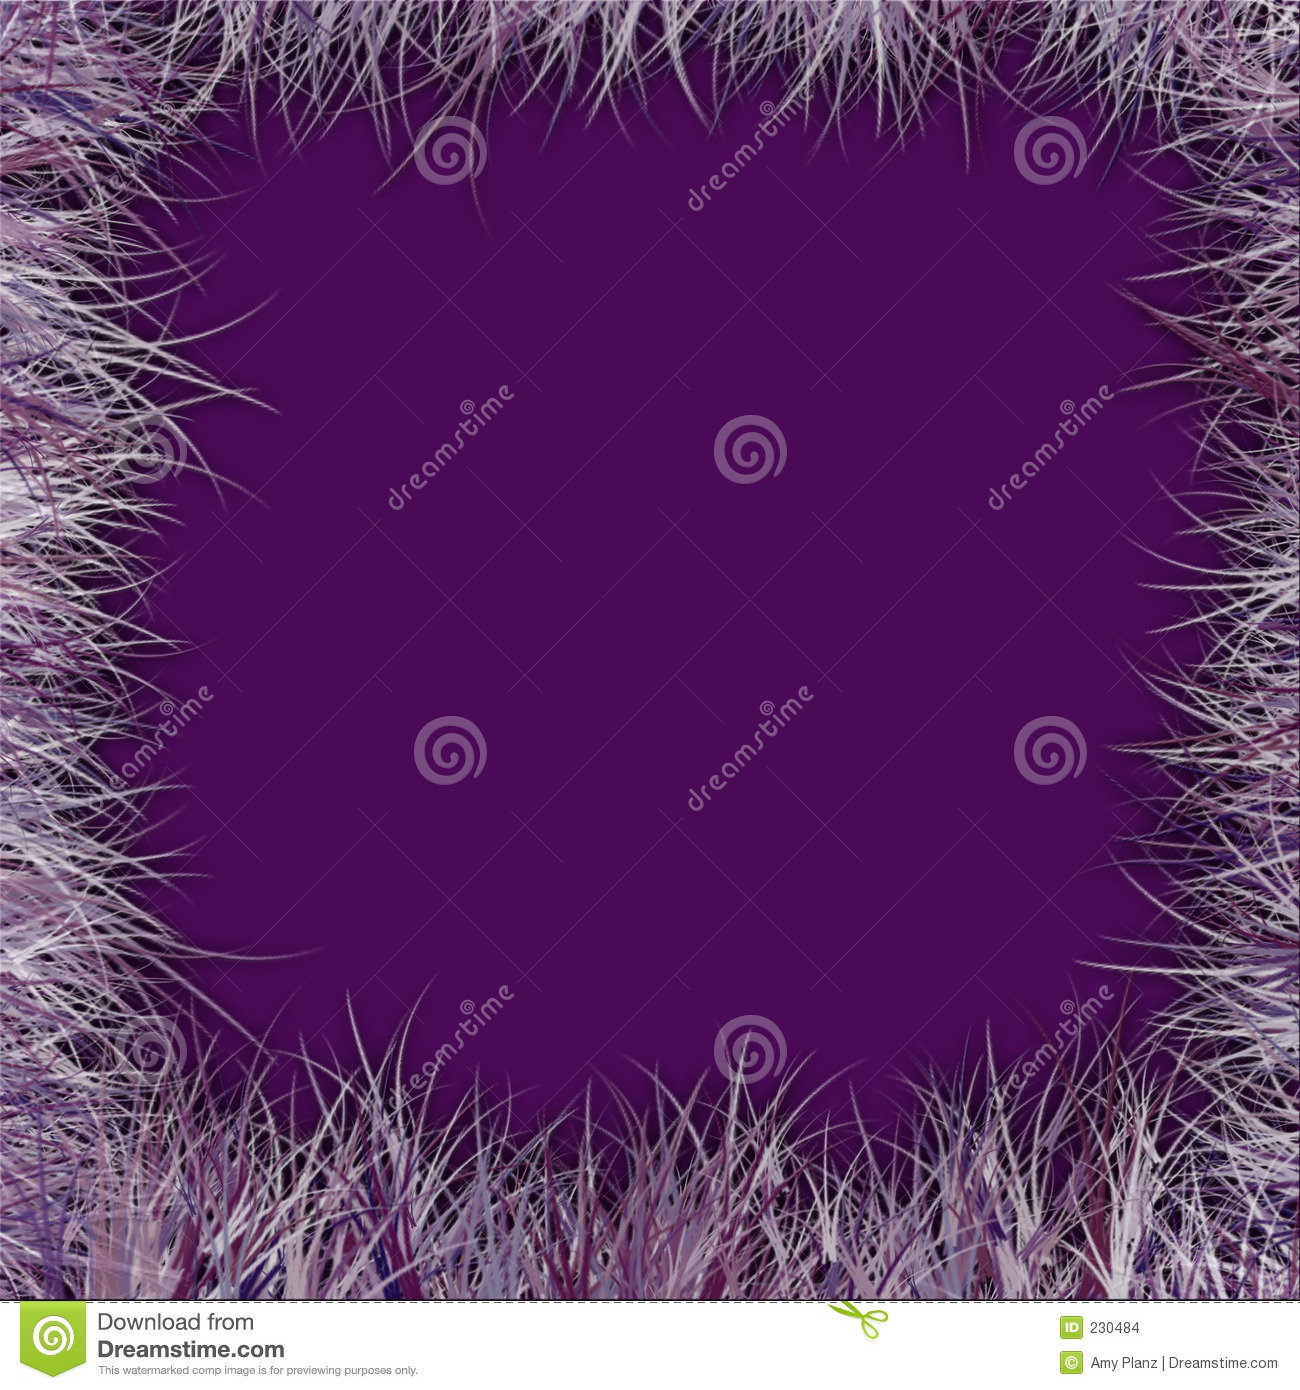 Stock Images  Feather Boa Border